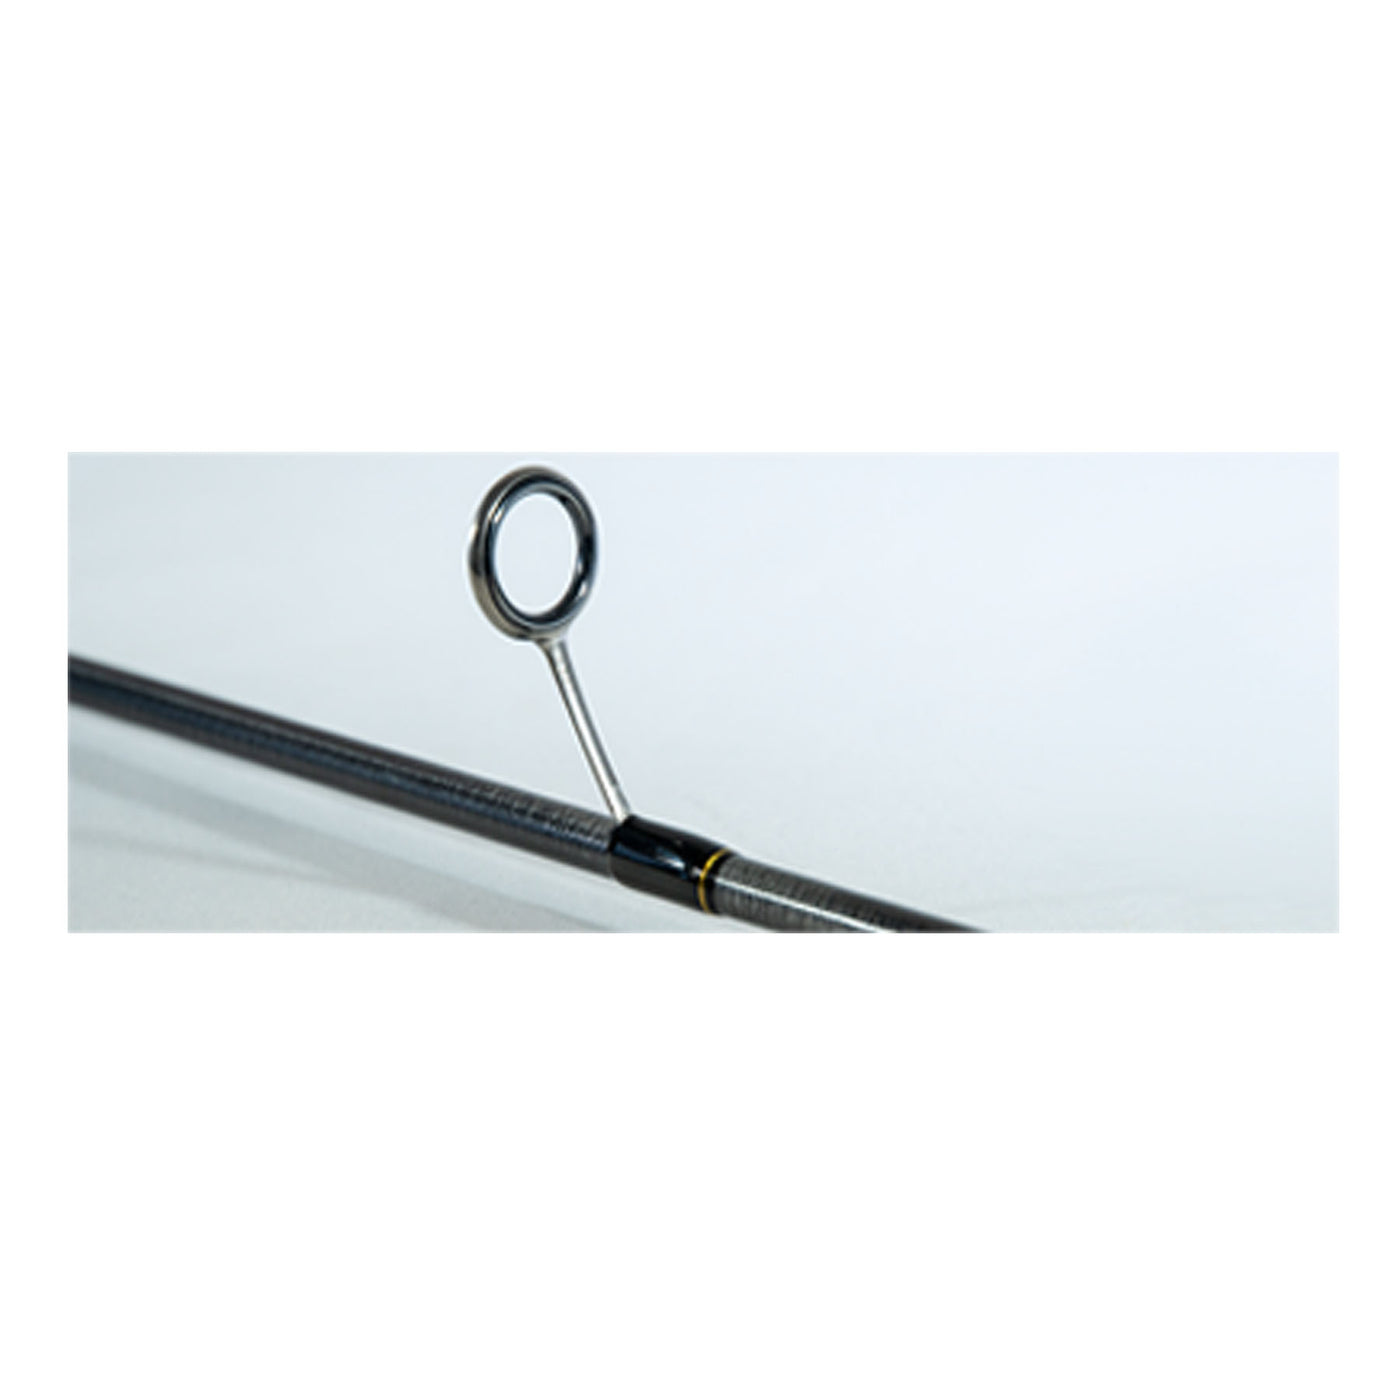 Jake’s Lil Mullet 7’6” Med-Heavy All Around Inshore Fishing Rod Component  Kit